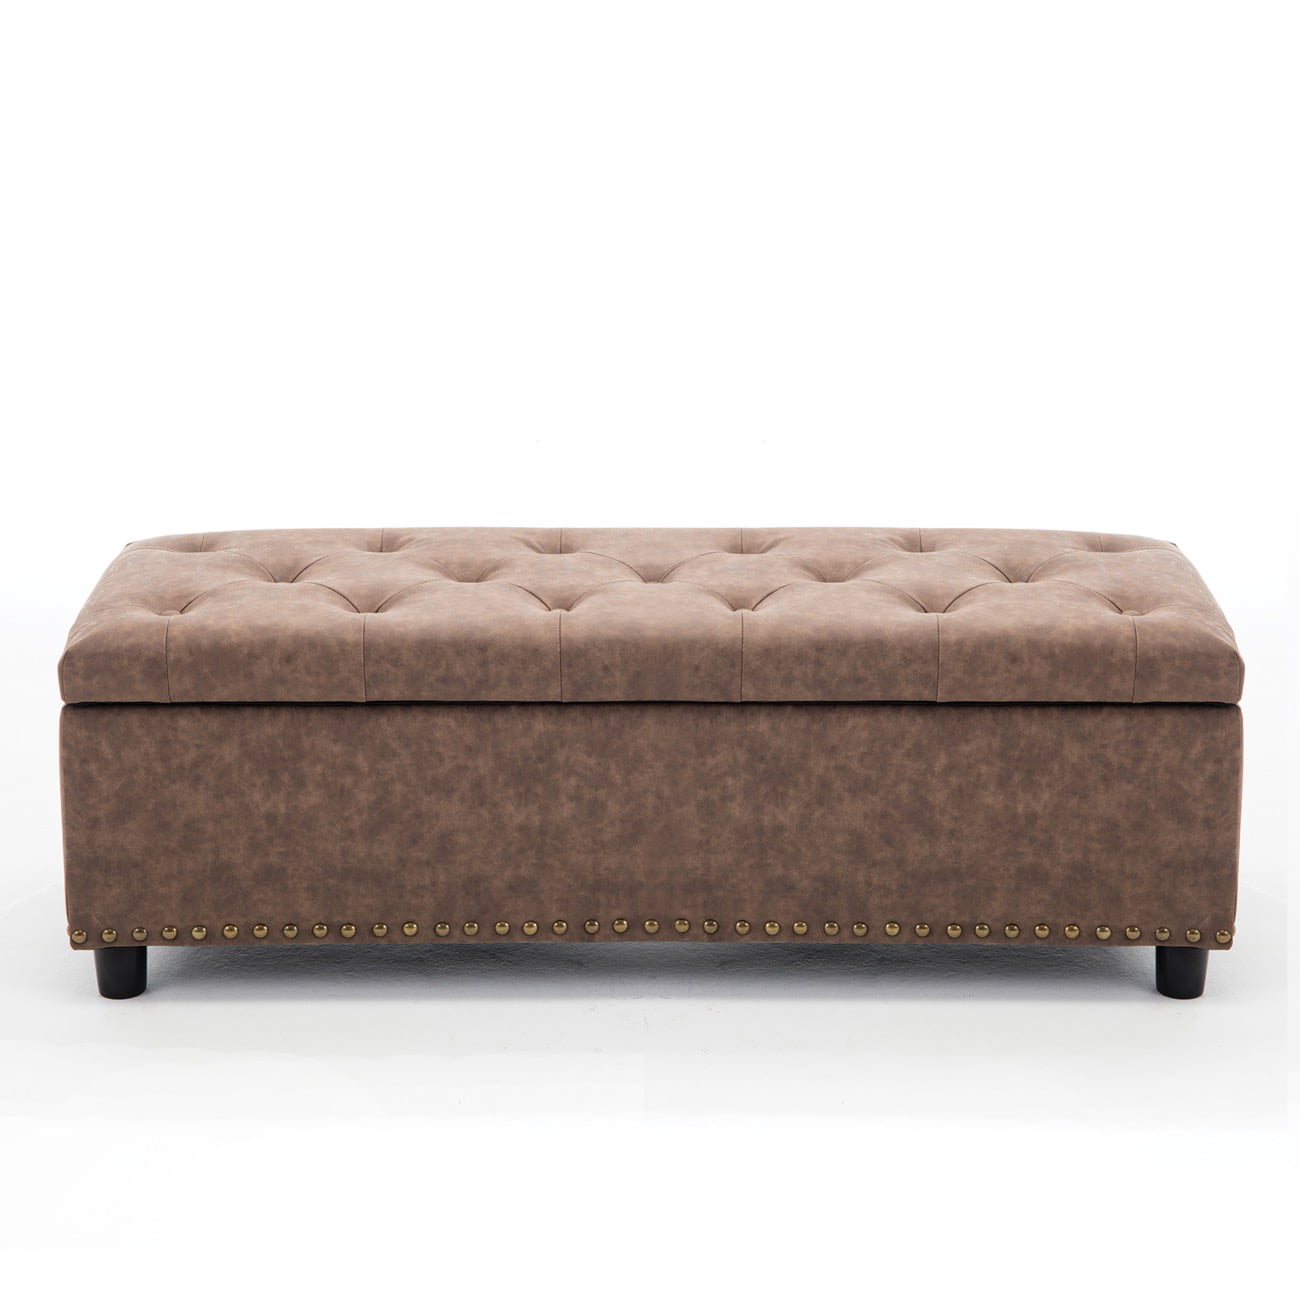 Belleze 48 Upholstered Faux Leather, Round Brown Faux Leather Storage Ottoman